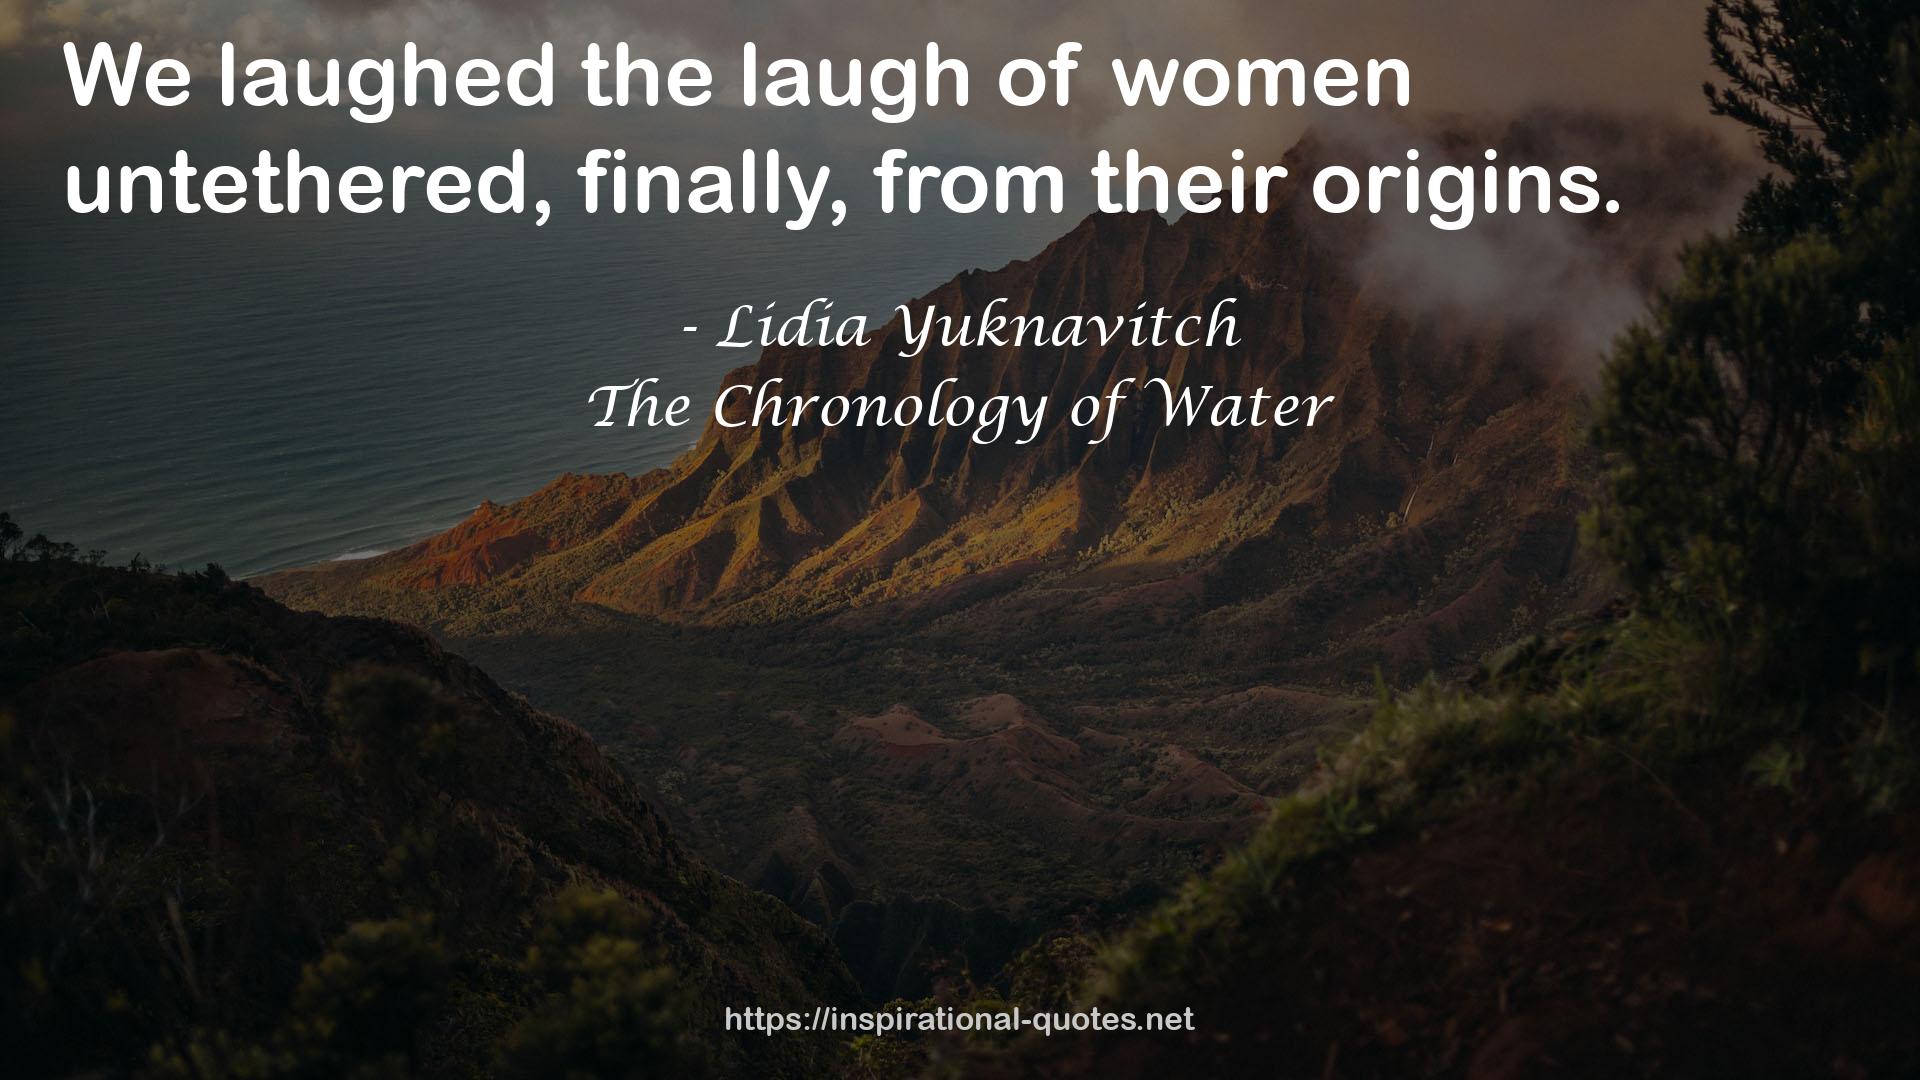 The Chronology of Water QUOTES